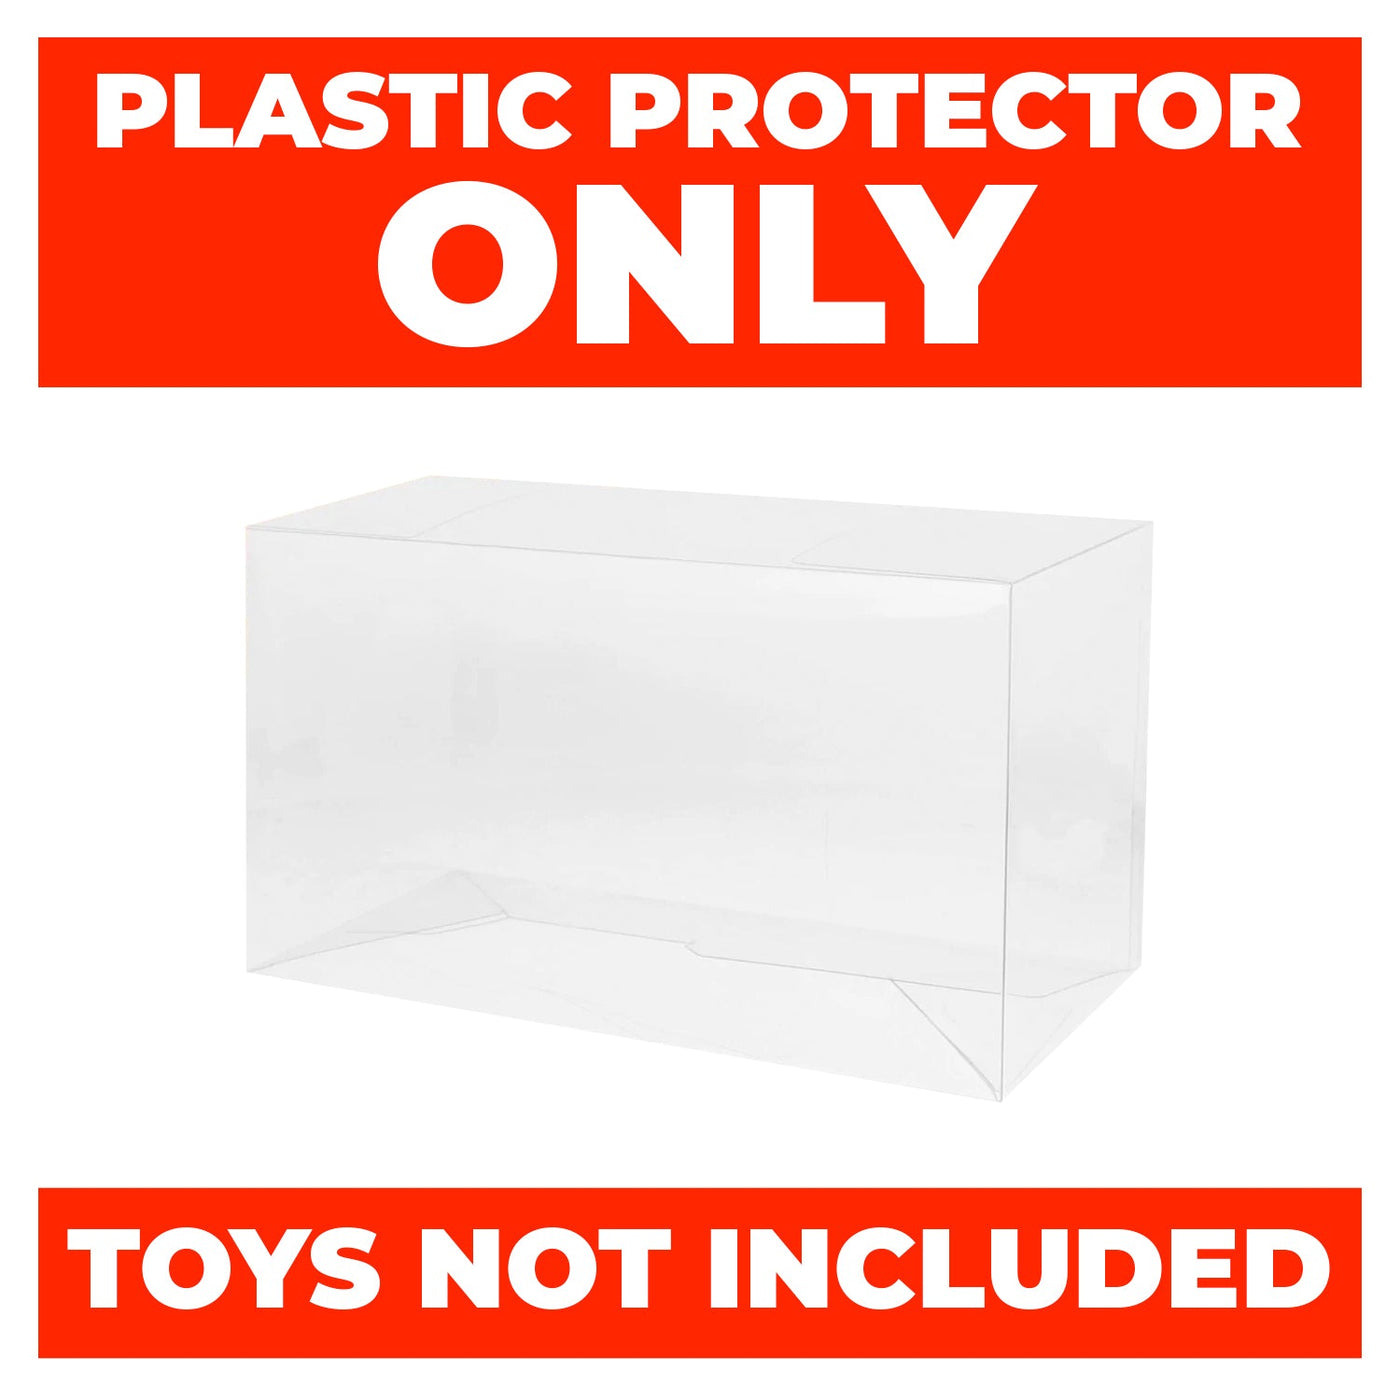 2 pops side by side best funko pop protectors thick strong uv scratch flat top stack vinyl display geek plastic shield vaulted eco armor fits collect protect display case kollector protector